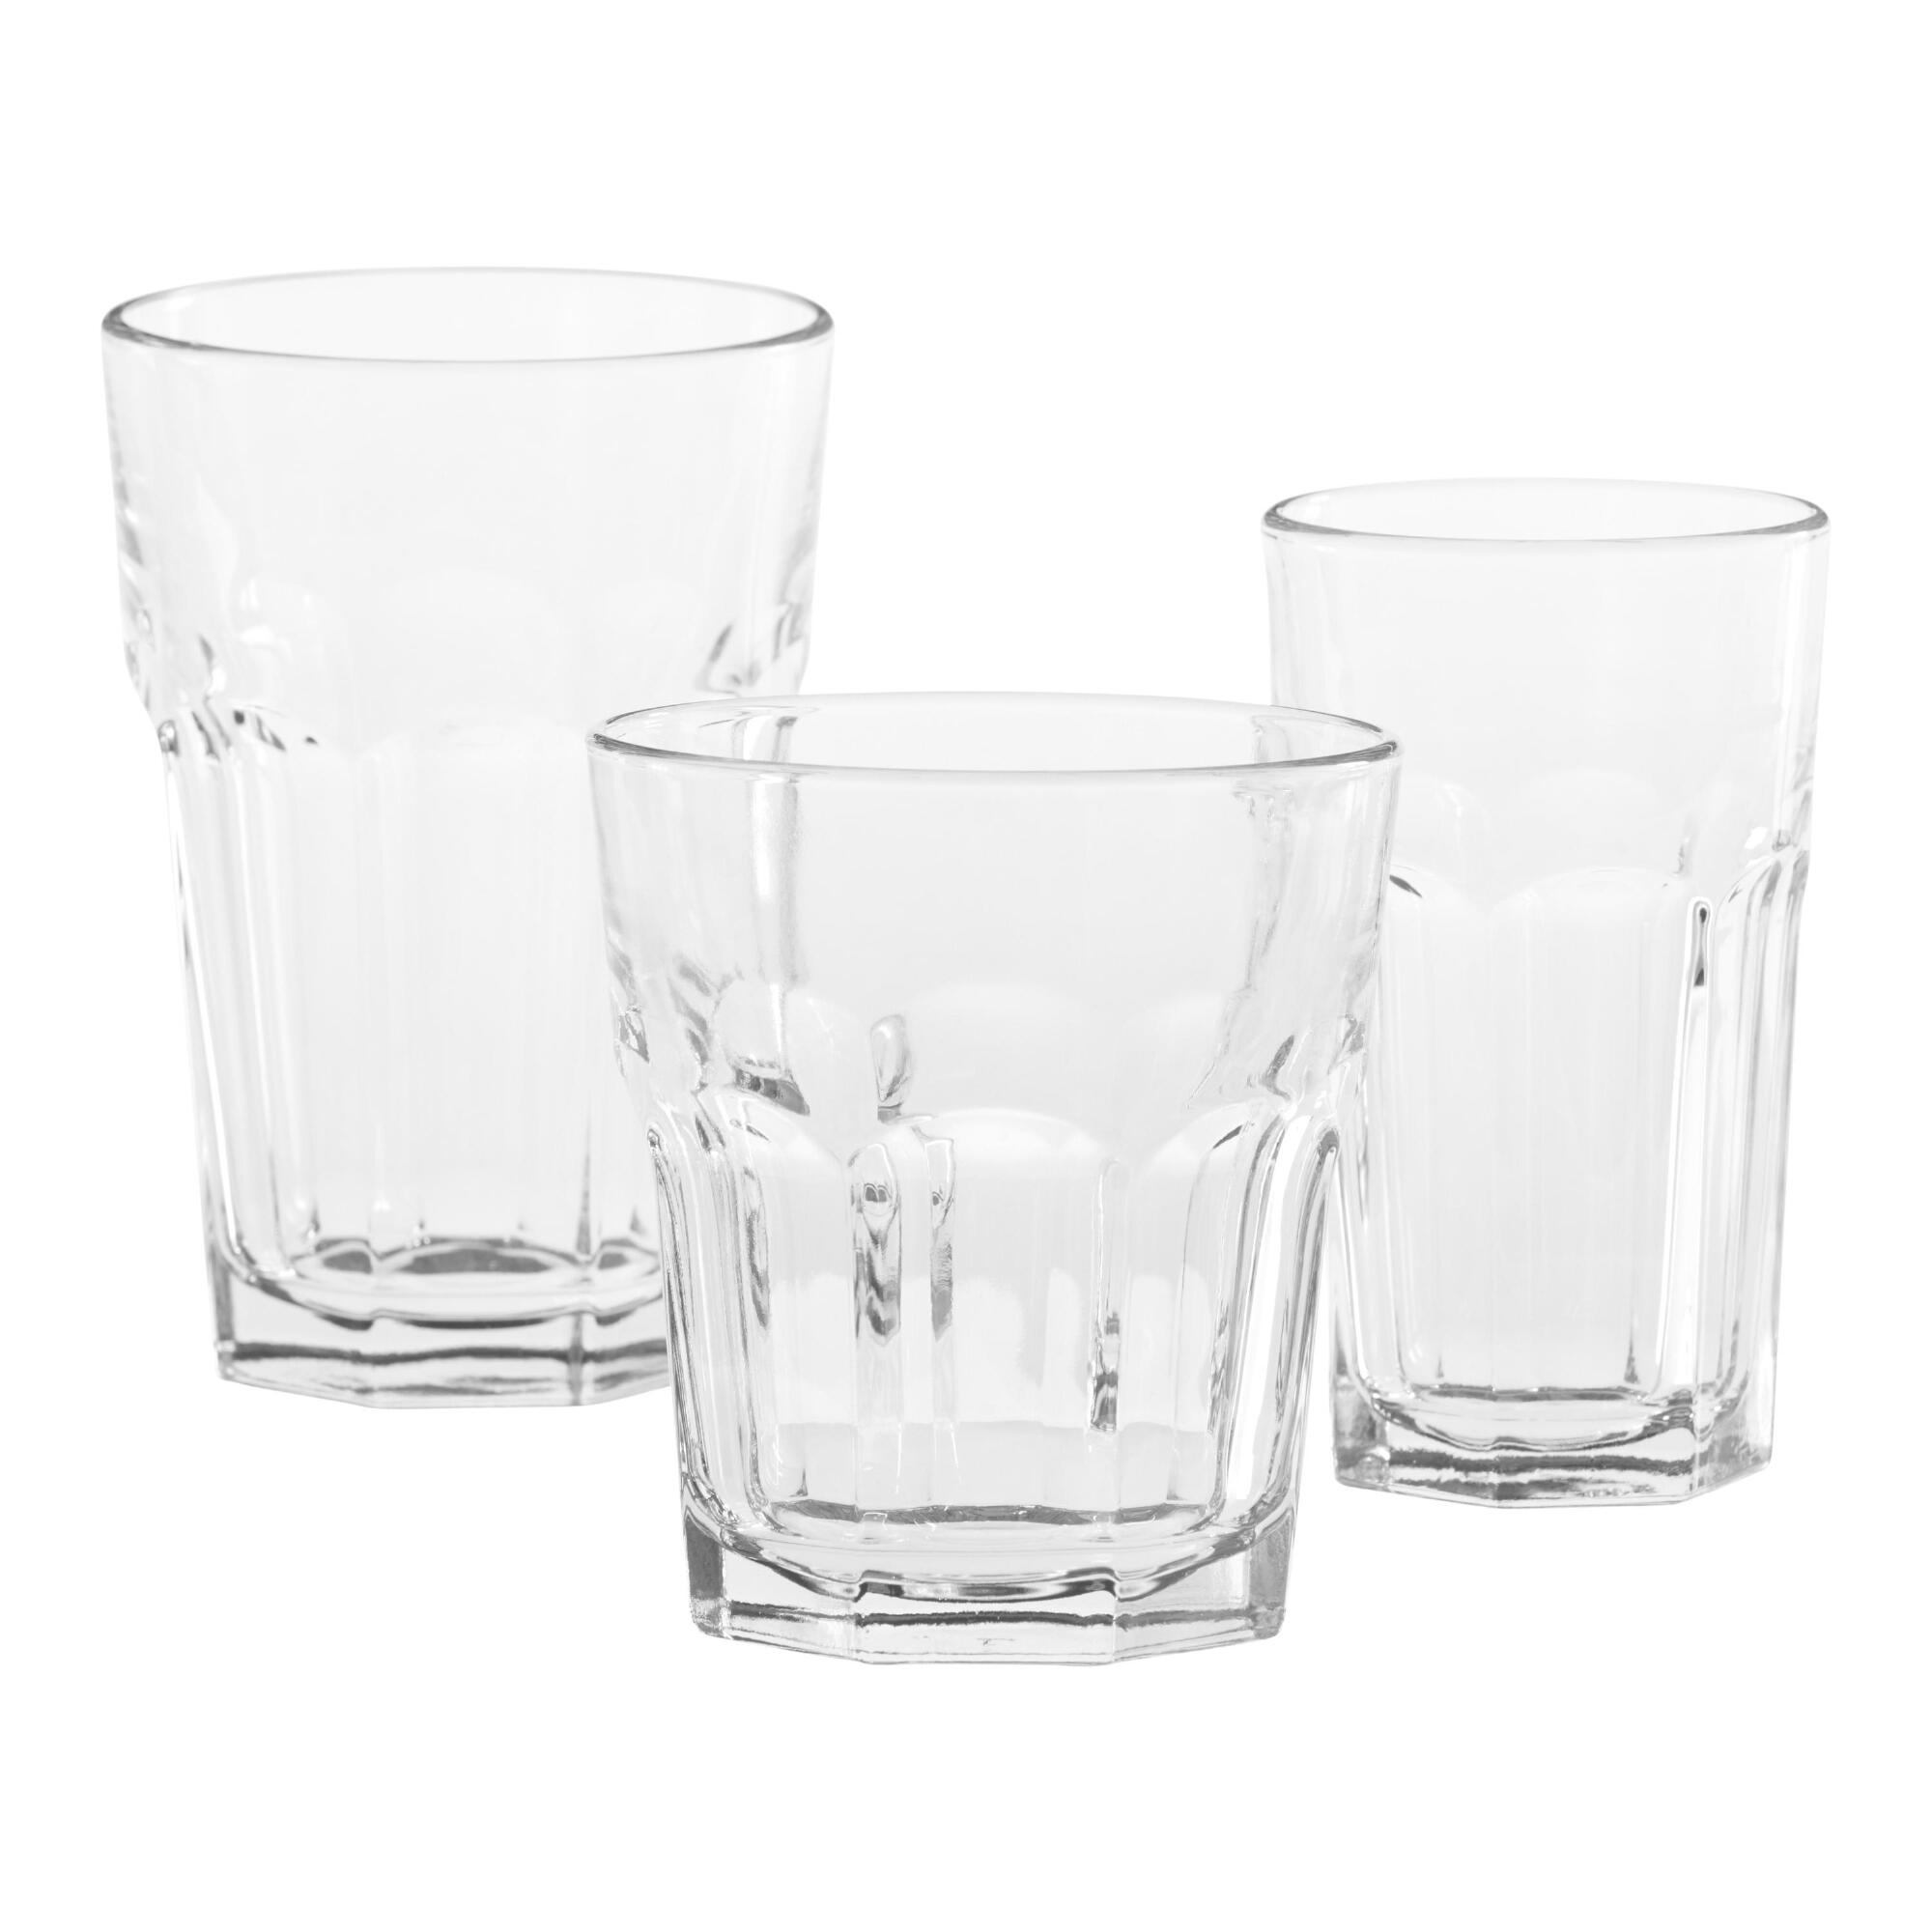 Gibraltar Glassware Collection by World Market